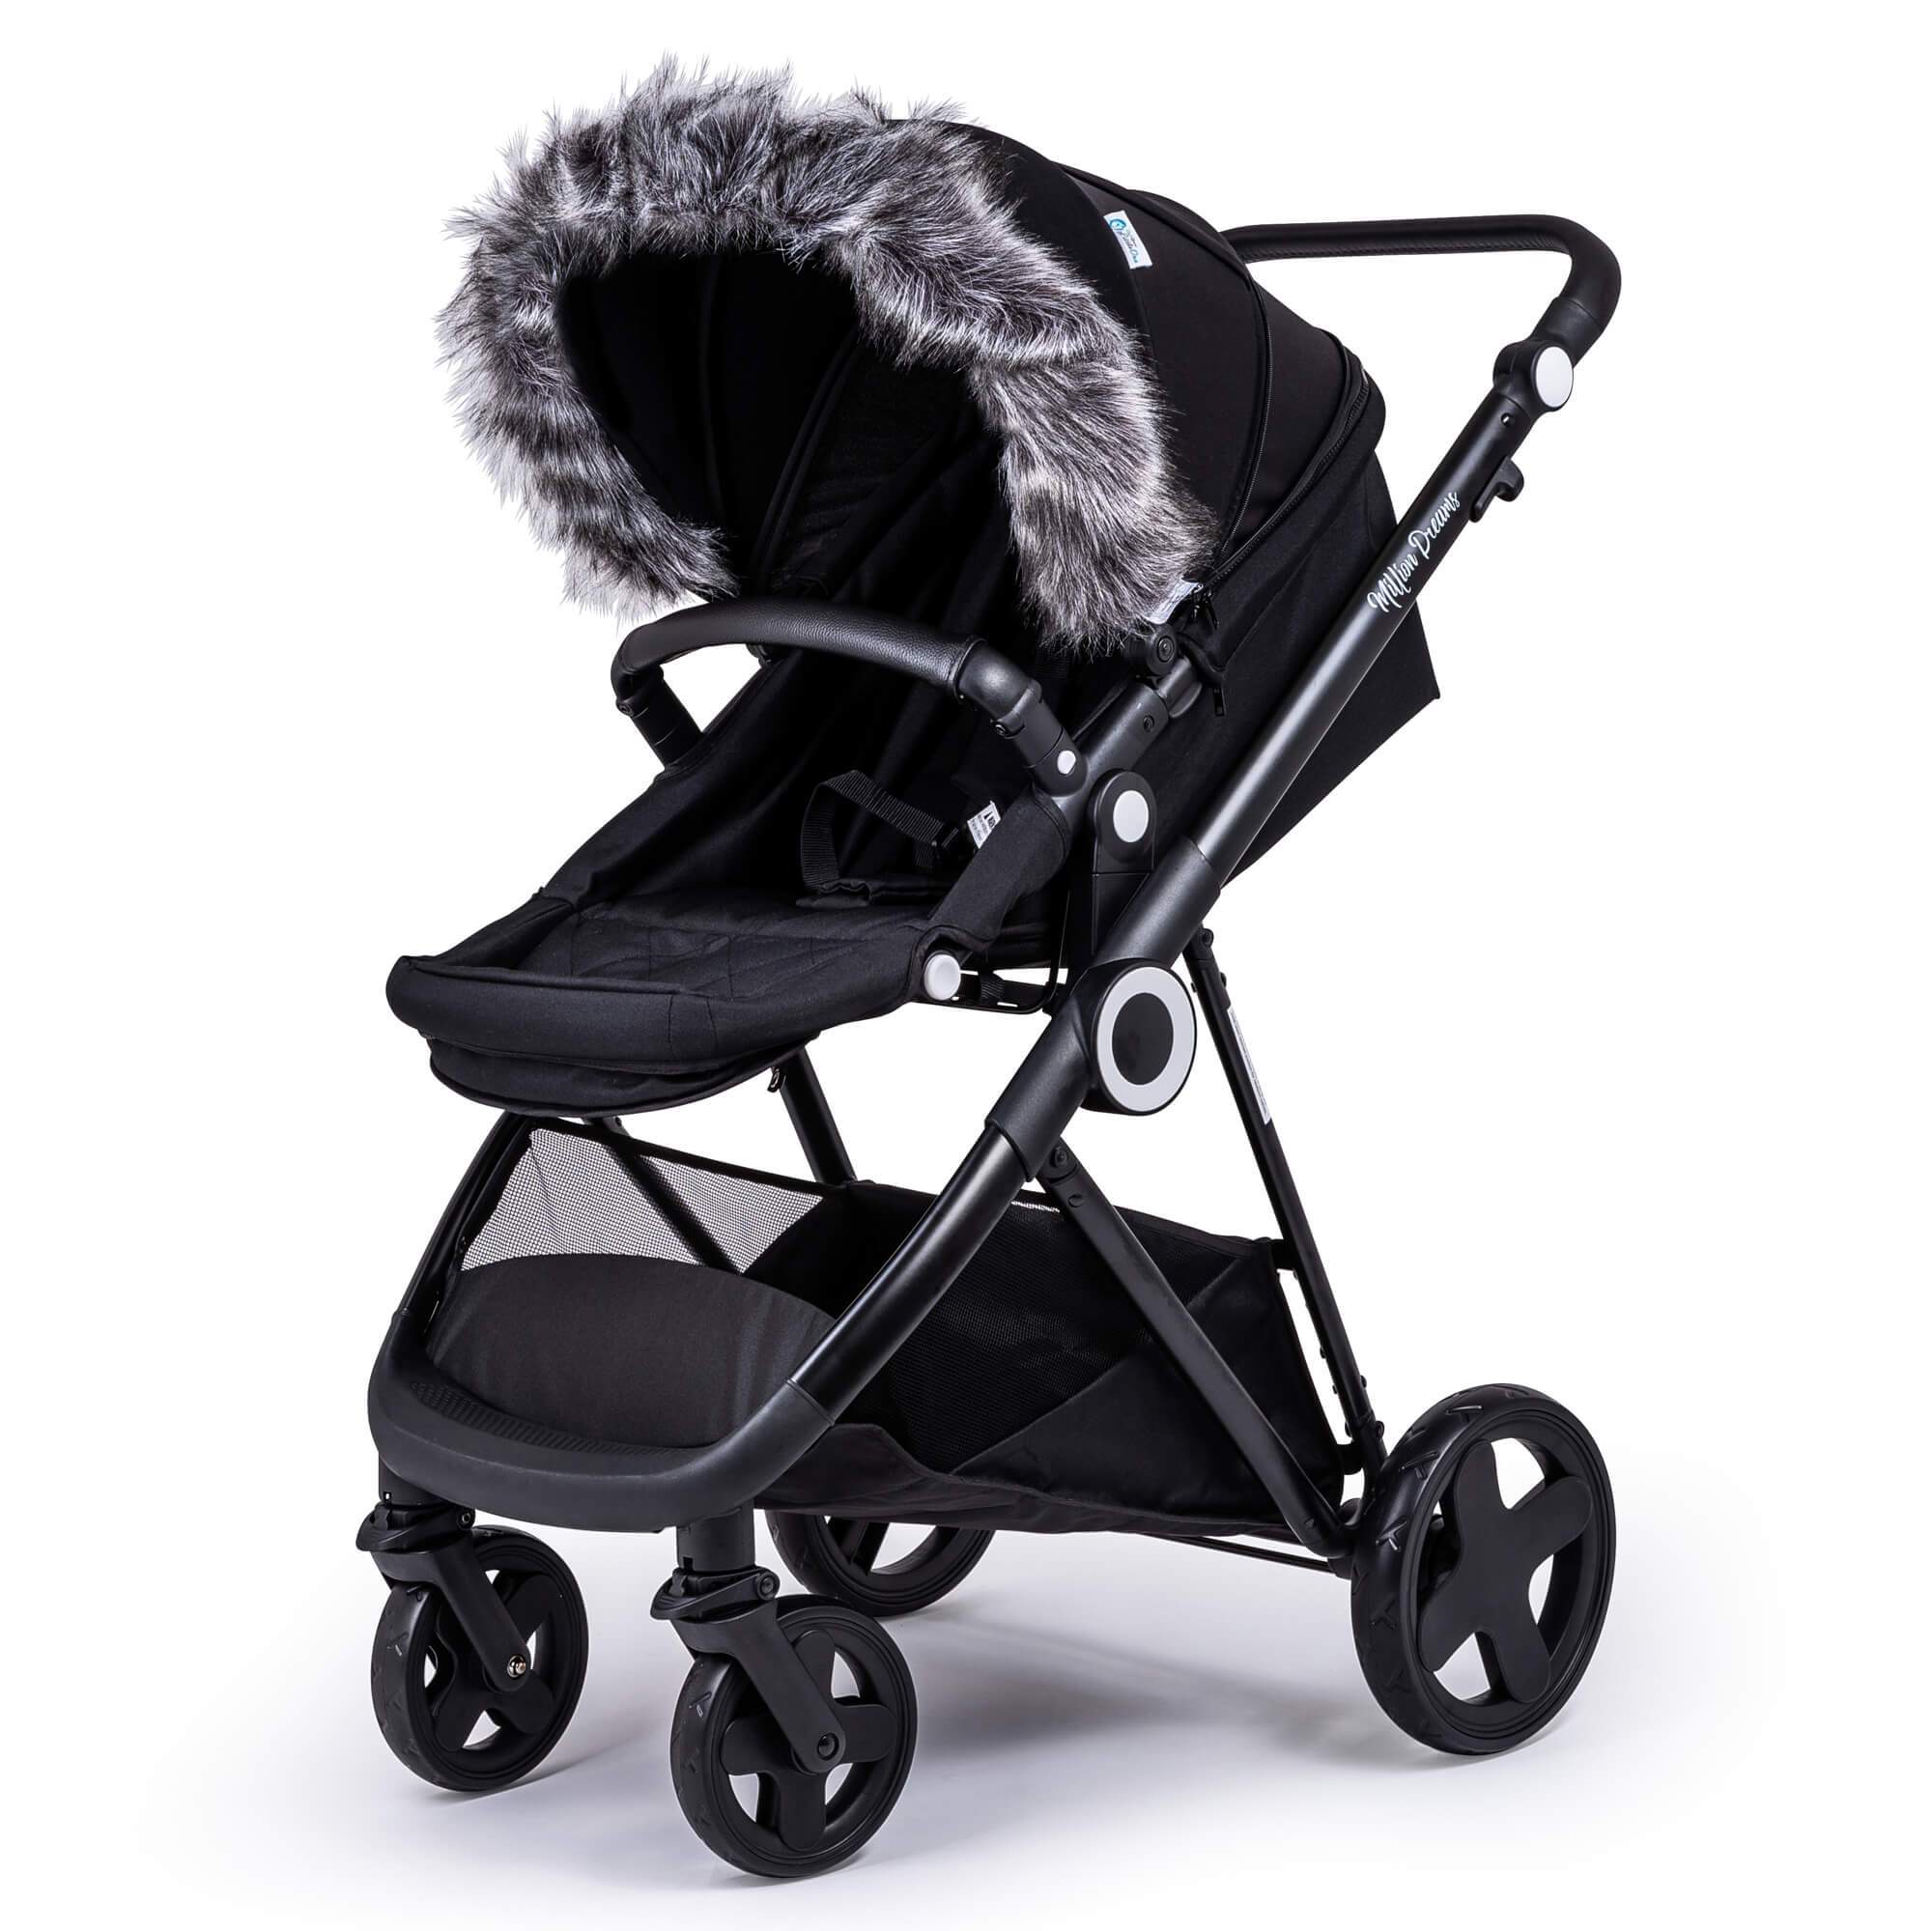 Pram Fur Hood Trim Attachment for Pushchair Compatible with Stokke - Dark Grey / Fits All Models | For Your Little One